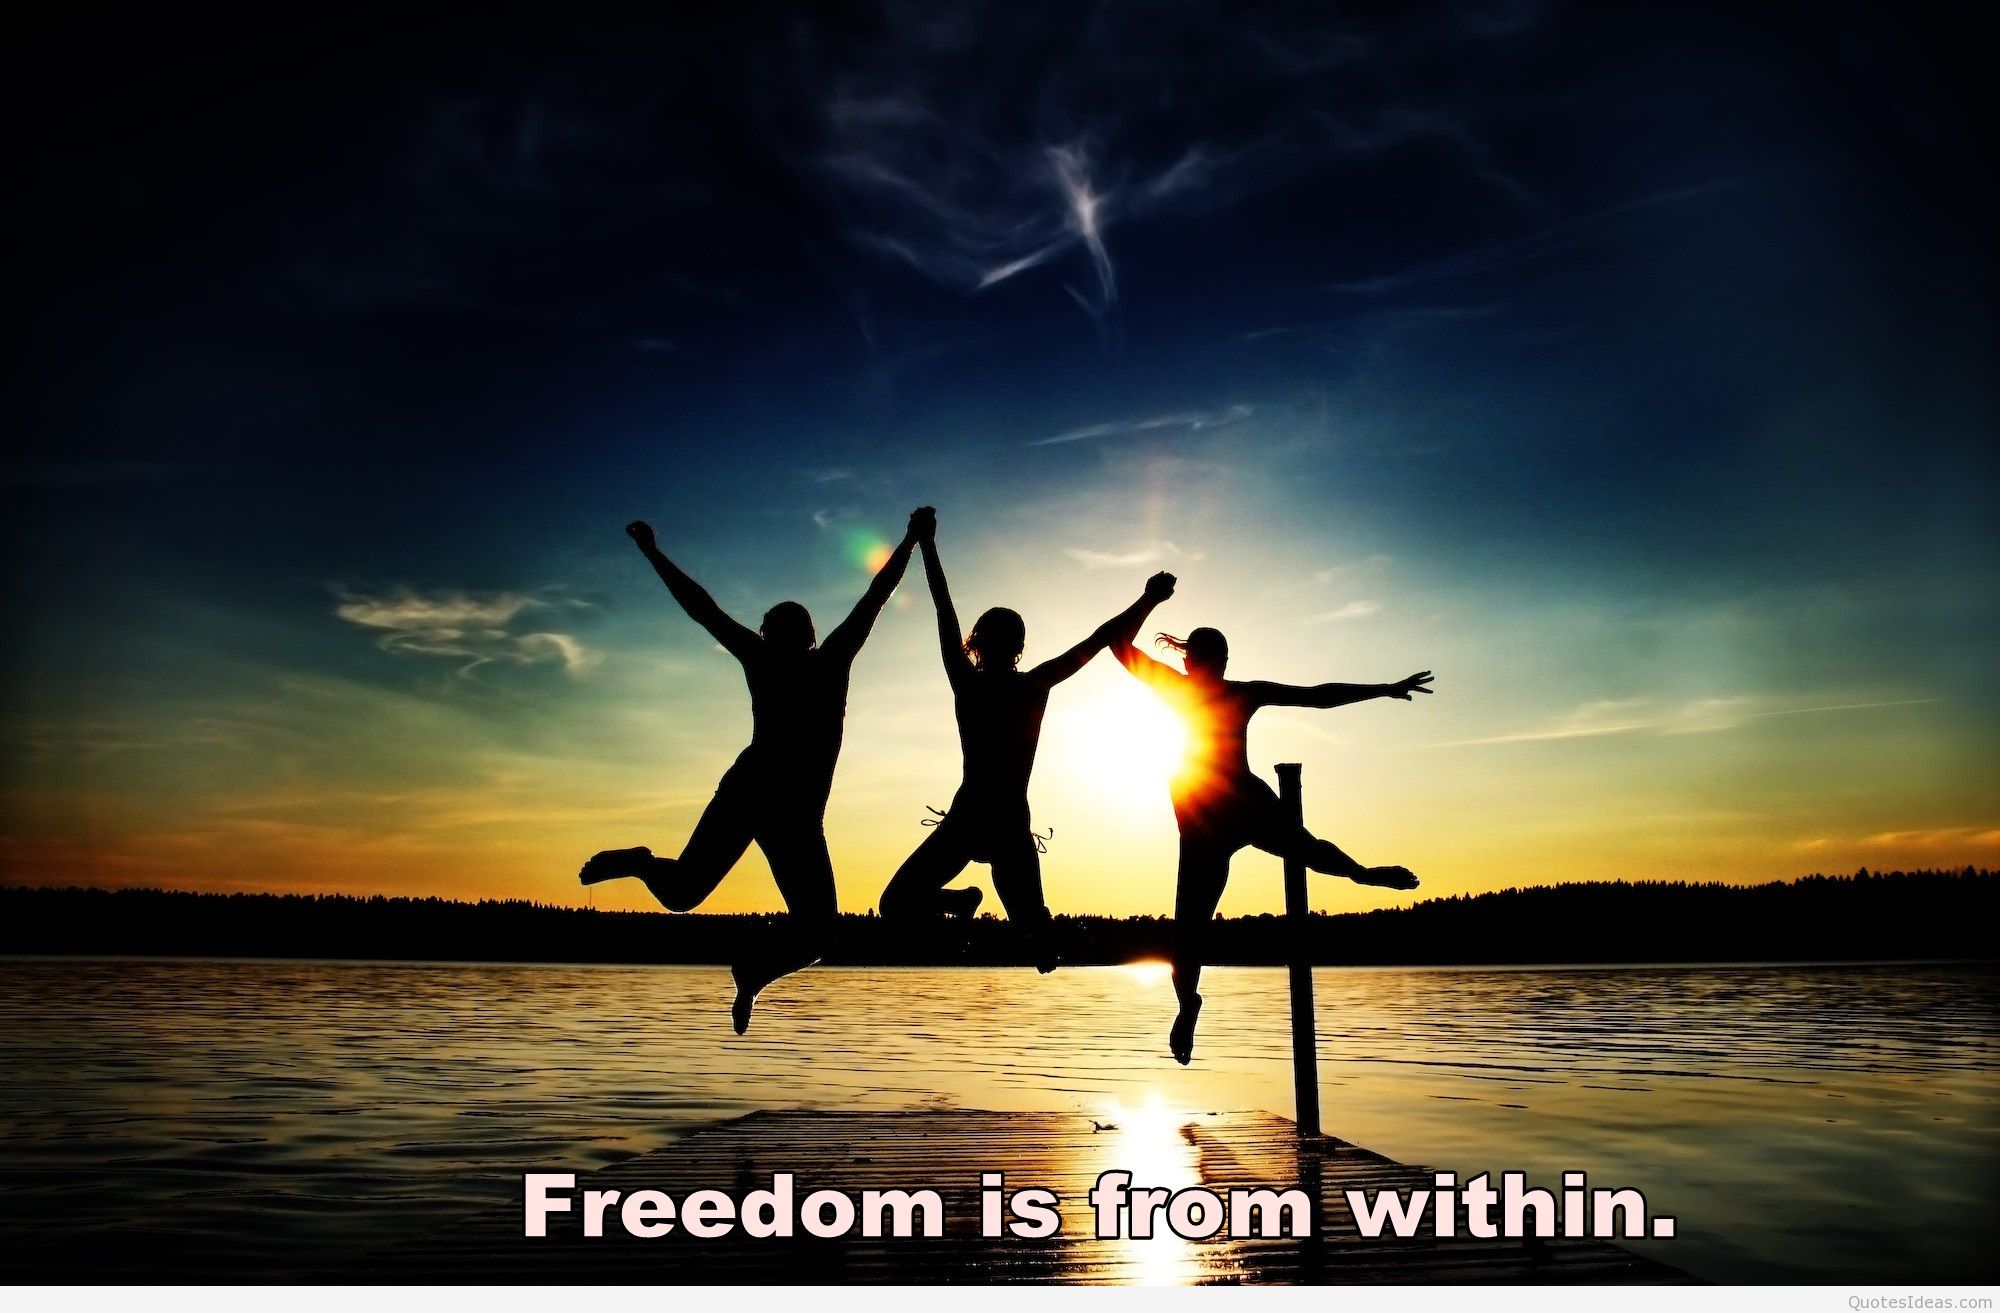 Freedom is from within